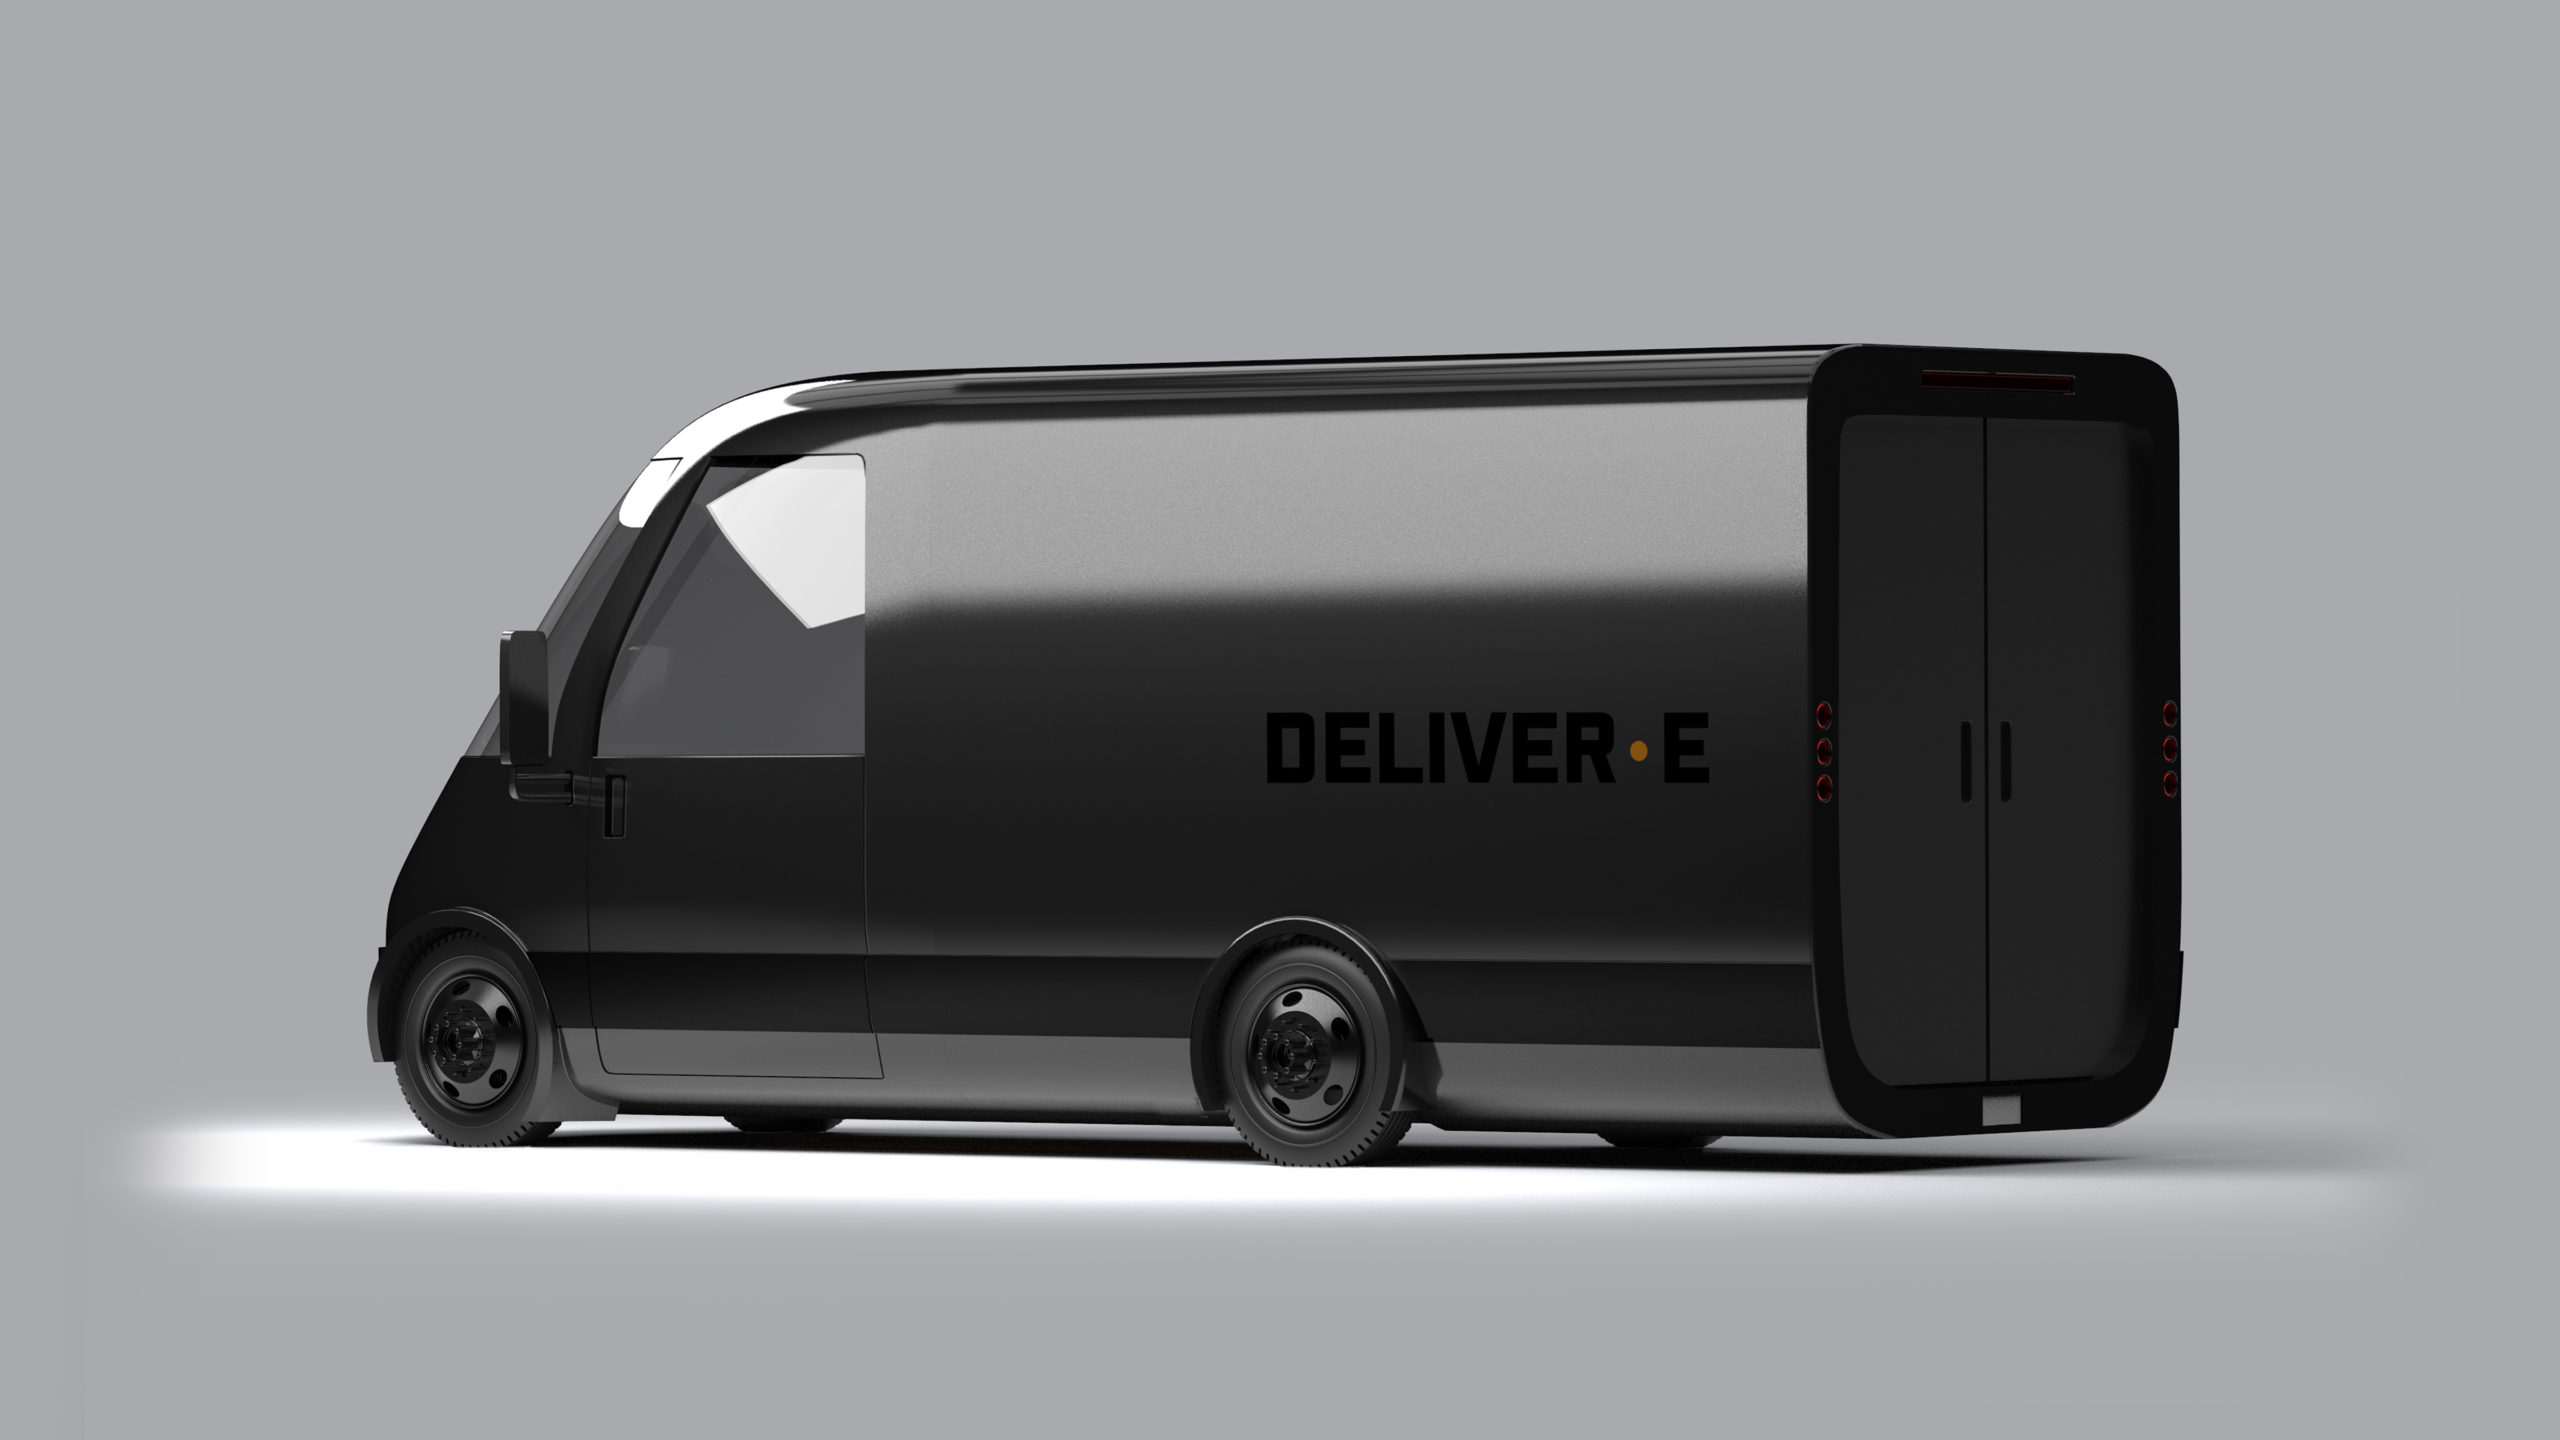 Bollinger’s Slick New Electric Van Has A Massive Greenhouse And Gets Five Battery Options